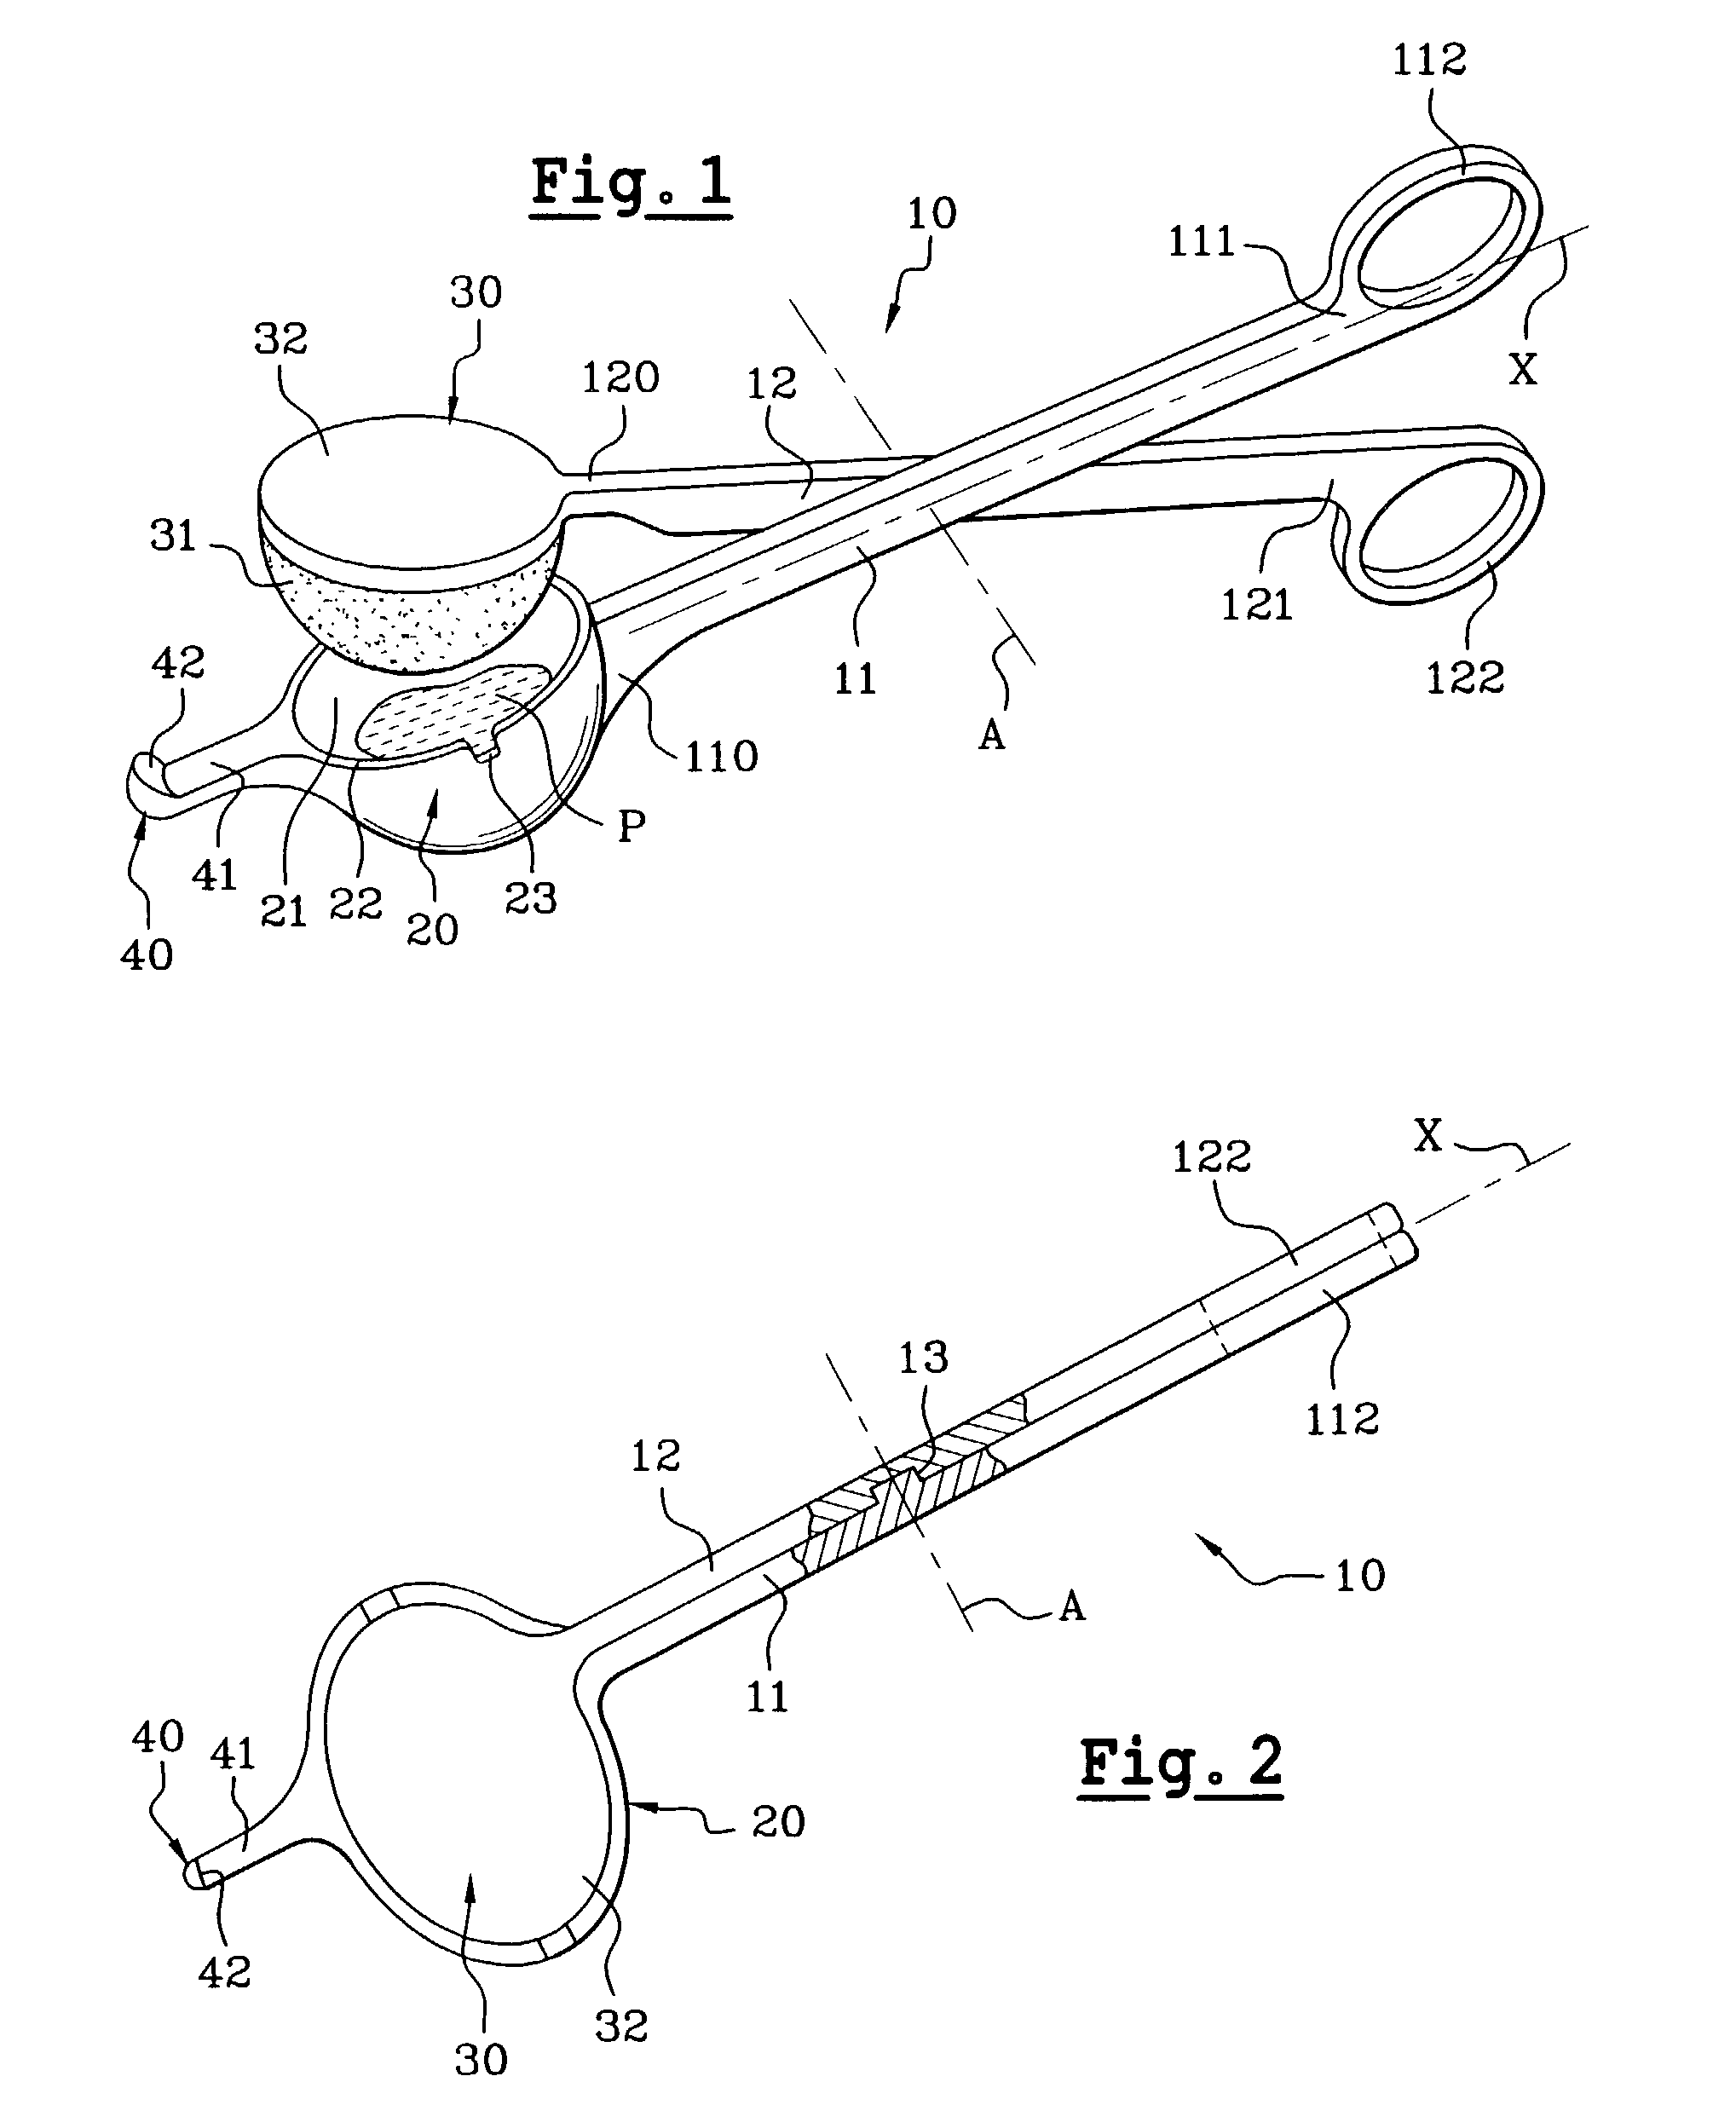 Device for the application of a hair product to sections of hair